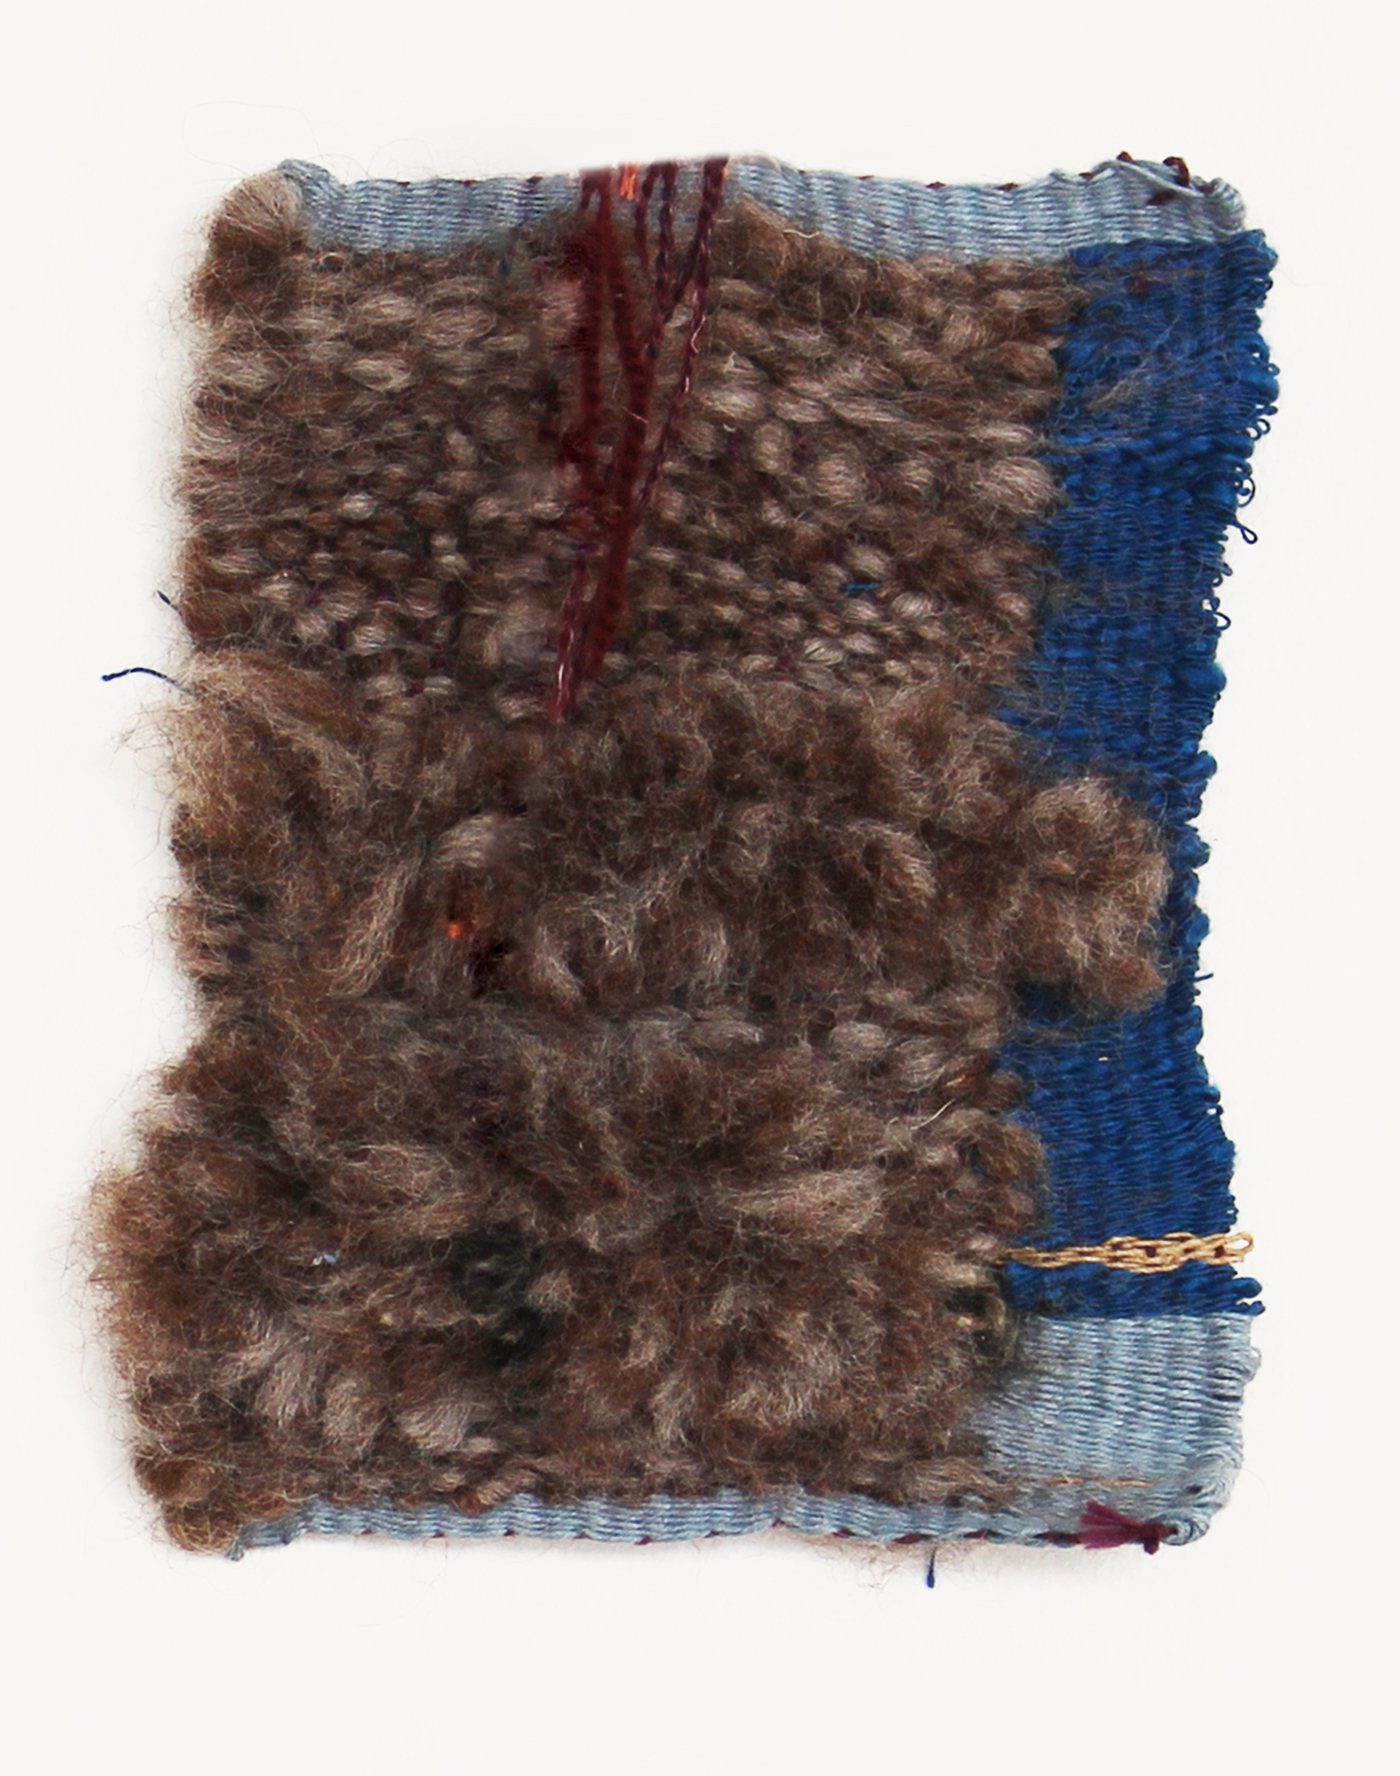 UNTITLED, 2020 cotton, wool, 8 x 6 3/8 in